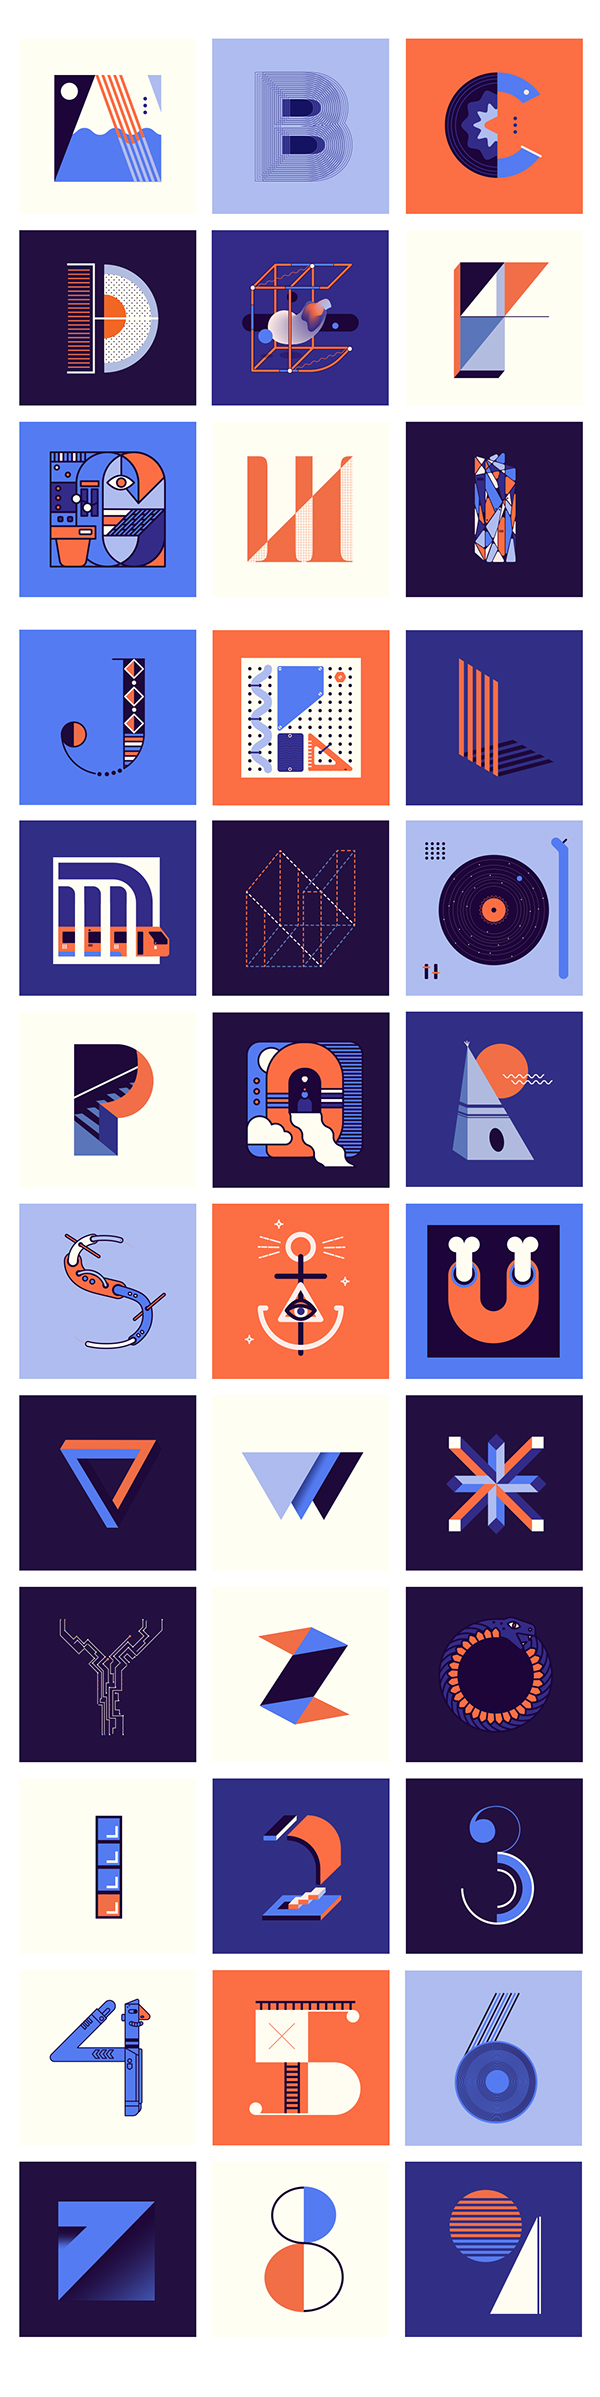 36 days of type project on Behance